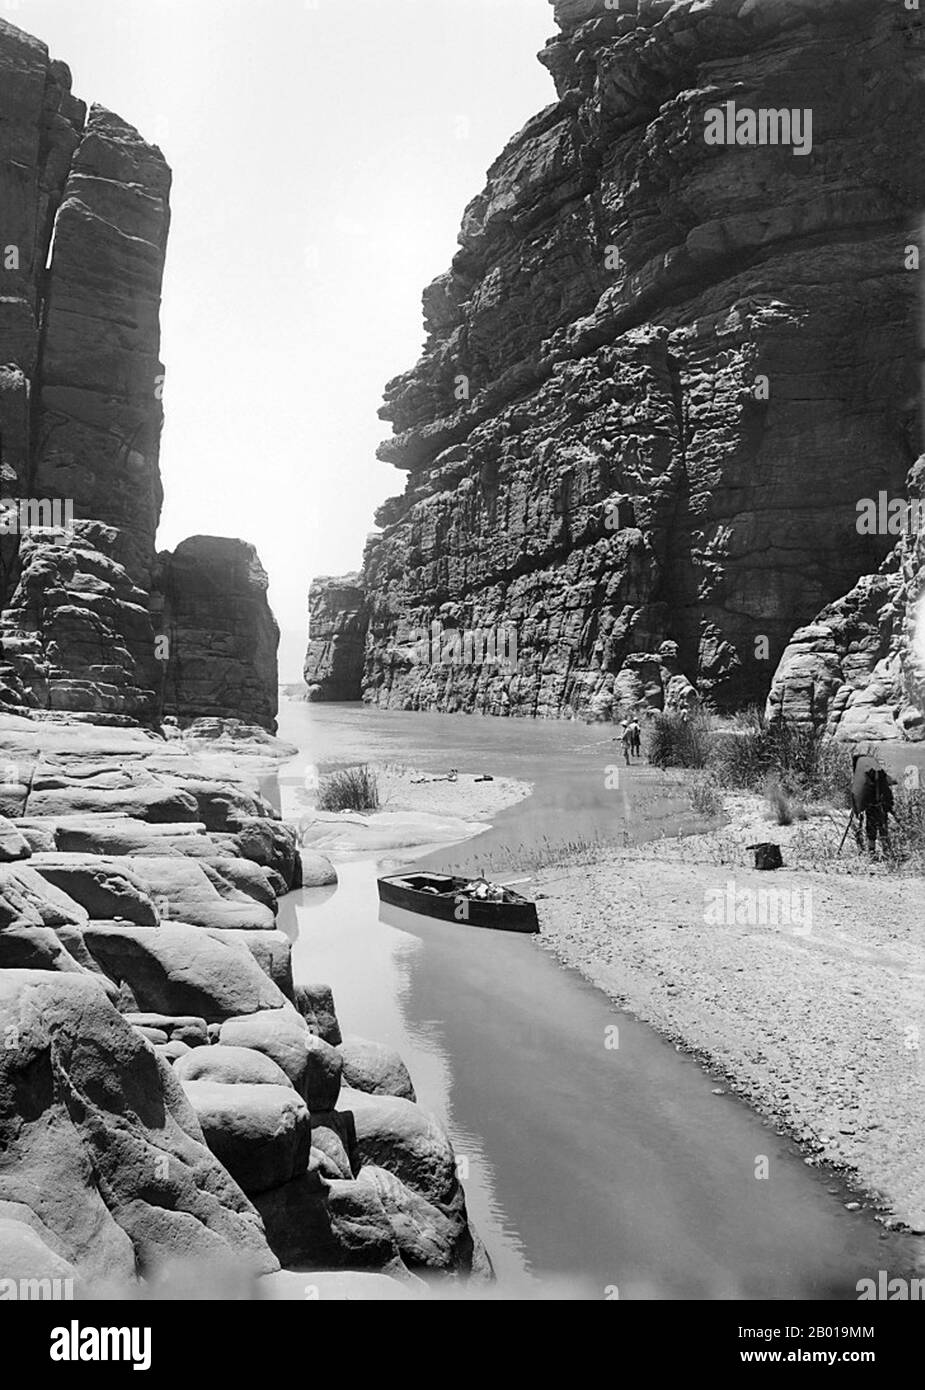 Jordan: The Arnon River (Wadi Mujib) Gorge, c. 1898-1914.  The Arnon is a river and wadi in western Jordan, known in modern times in Arabic as Wadi Mujib. Its length is about 72 km (45 miles), from its highlands in the desert to its entrance into the Dead Sea. It broadens to a width of 30 metres (100 feet) locally, but for the most part is narrow. Though low in summer, it runs as a torrent in the rainy winter season and is 2 to 3 metres (8 or 10 feet) deep in places. Its course flows northwesterly, but downstream its course becomes westerly. Stock Photo